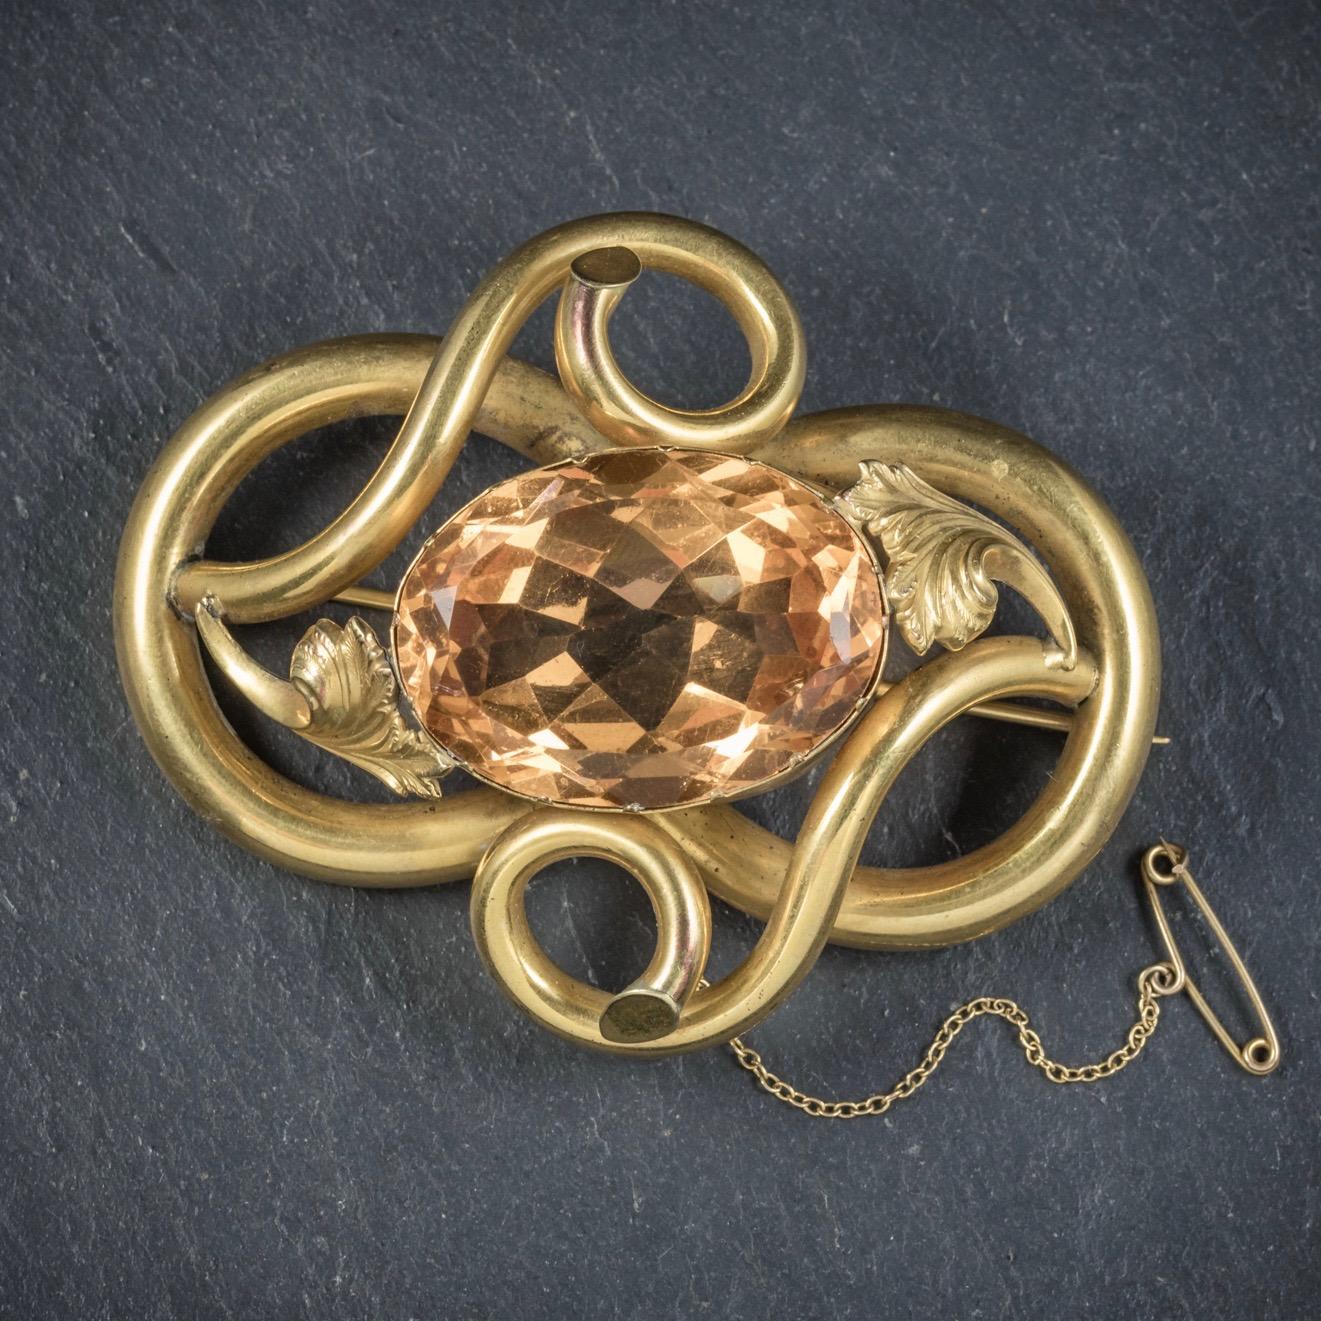 A grand antique Pinchbeck knot brooch that was beautifully made during the Victorian era, Circa 1880. 

The lovely piece is adorned with a large orange Paste Stone in the centre which glistens with a warm, radiant glow that simulates a Citrine.